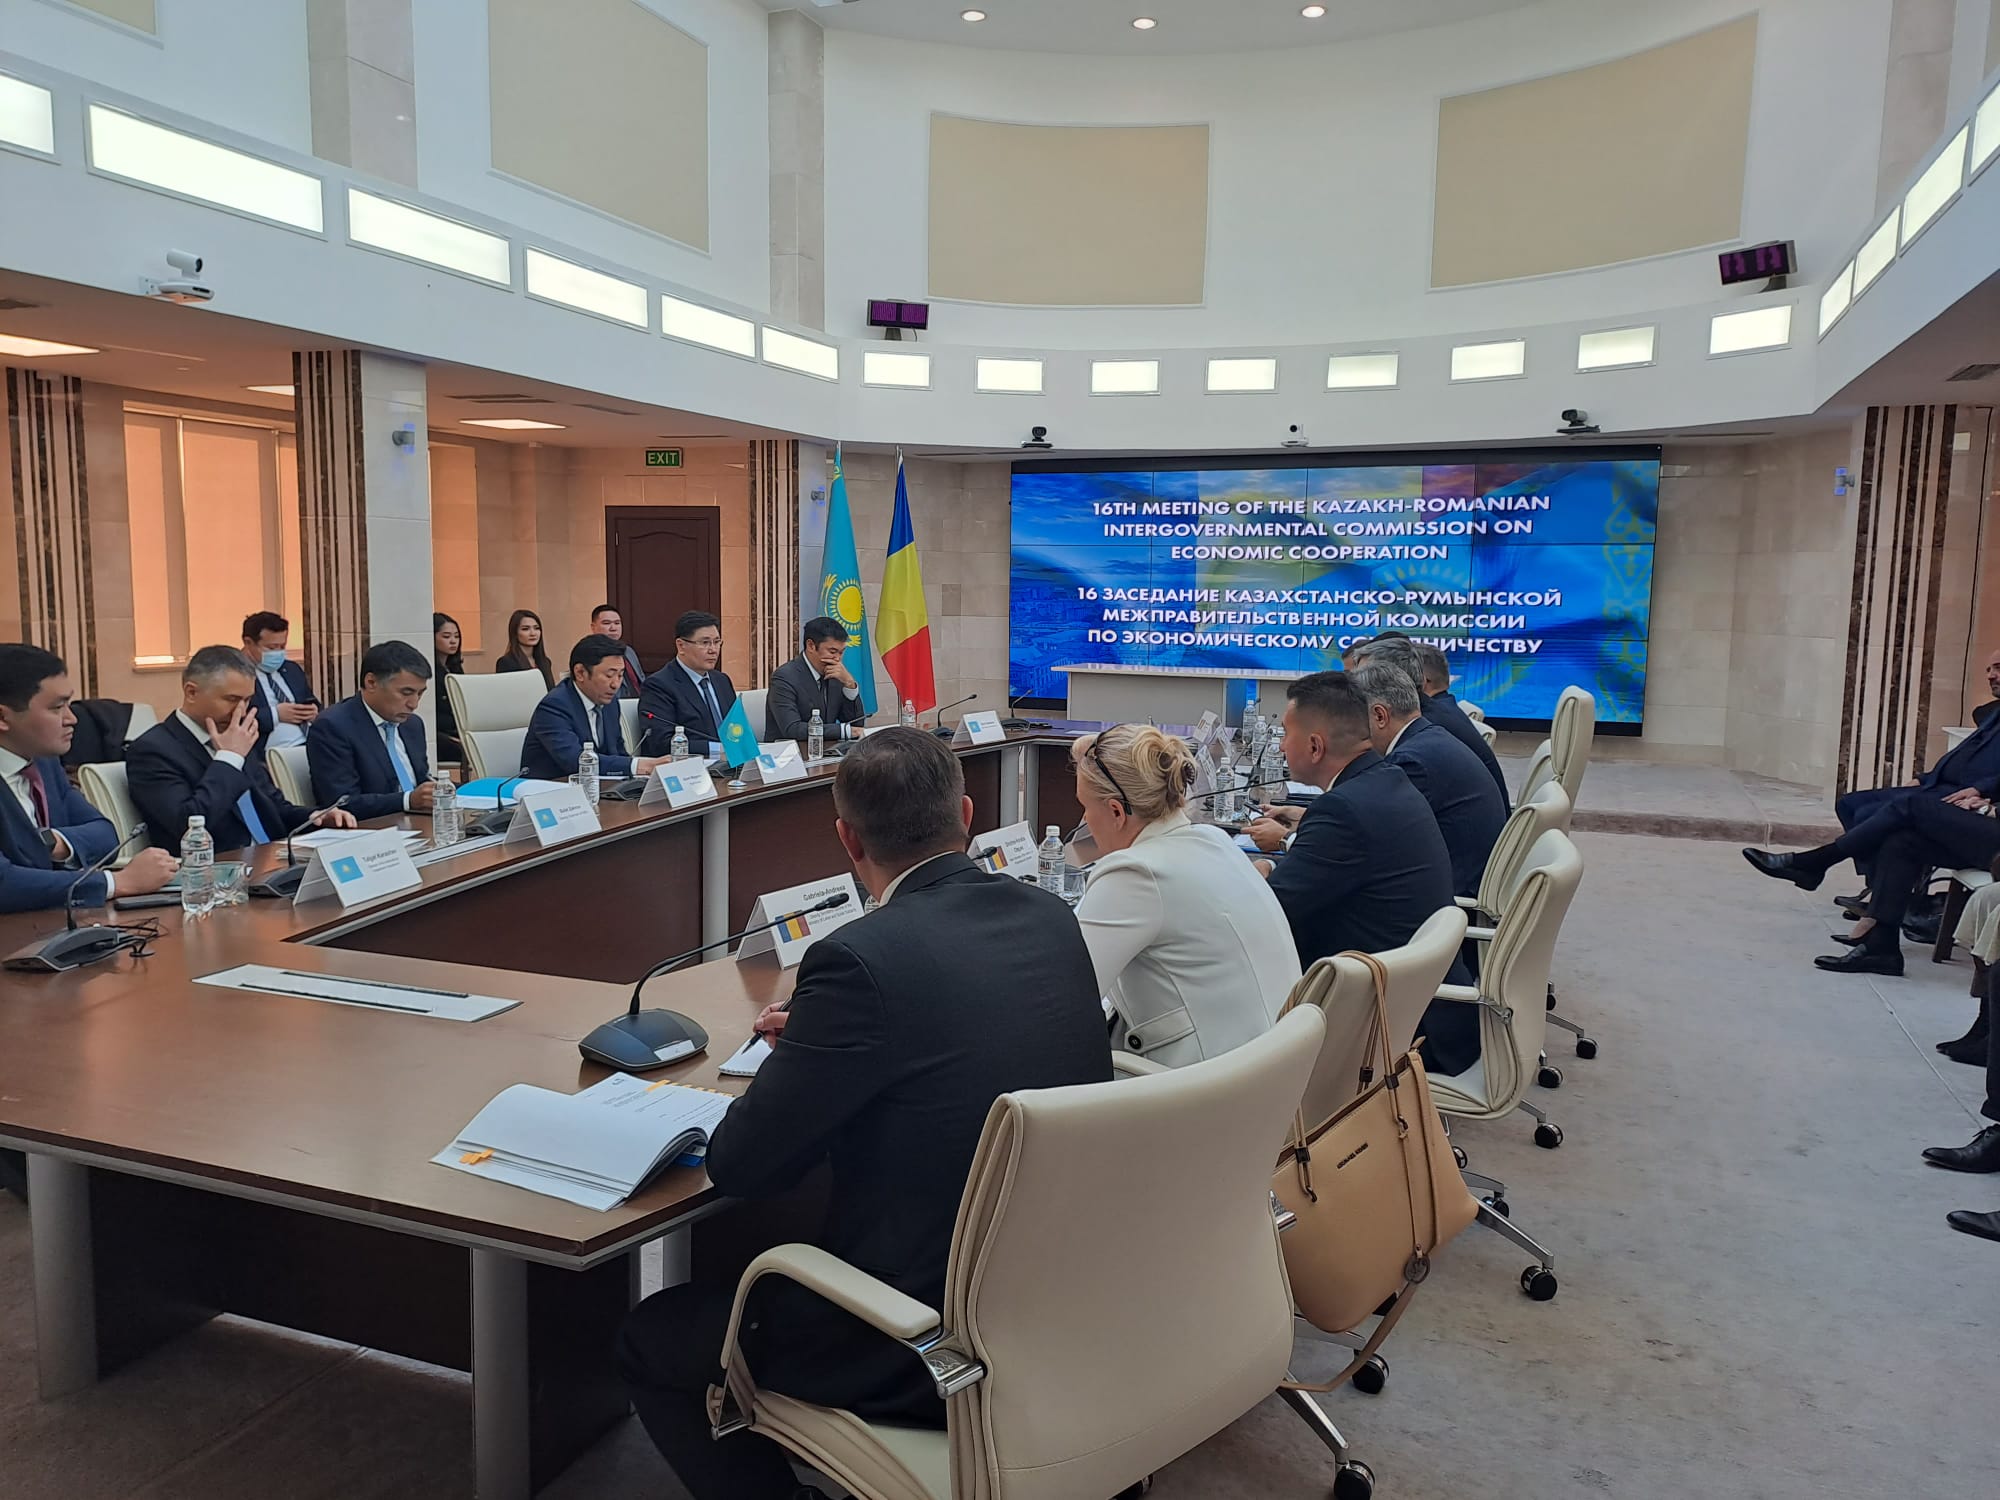 Bringing trade and economic partnership to a new level is the key goal of the Kazakh-Romanian IGC